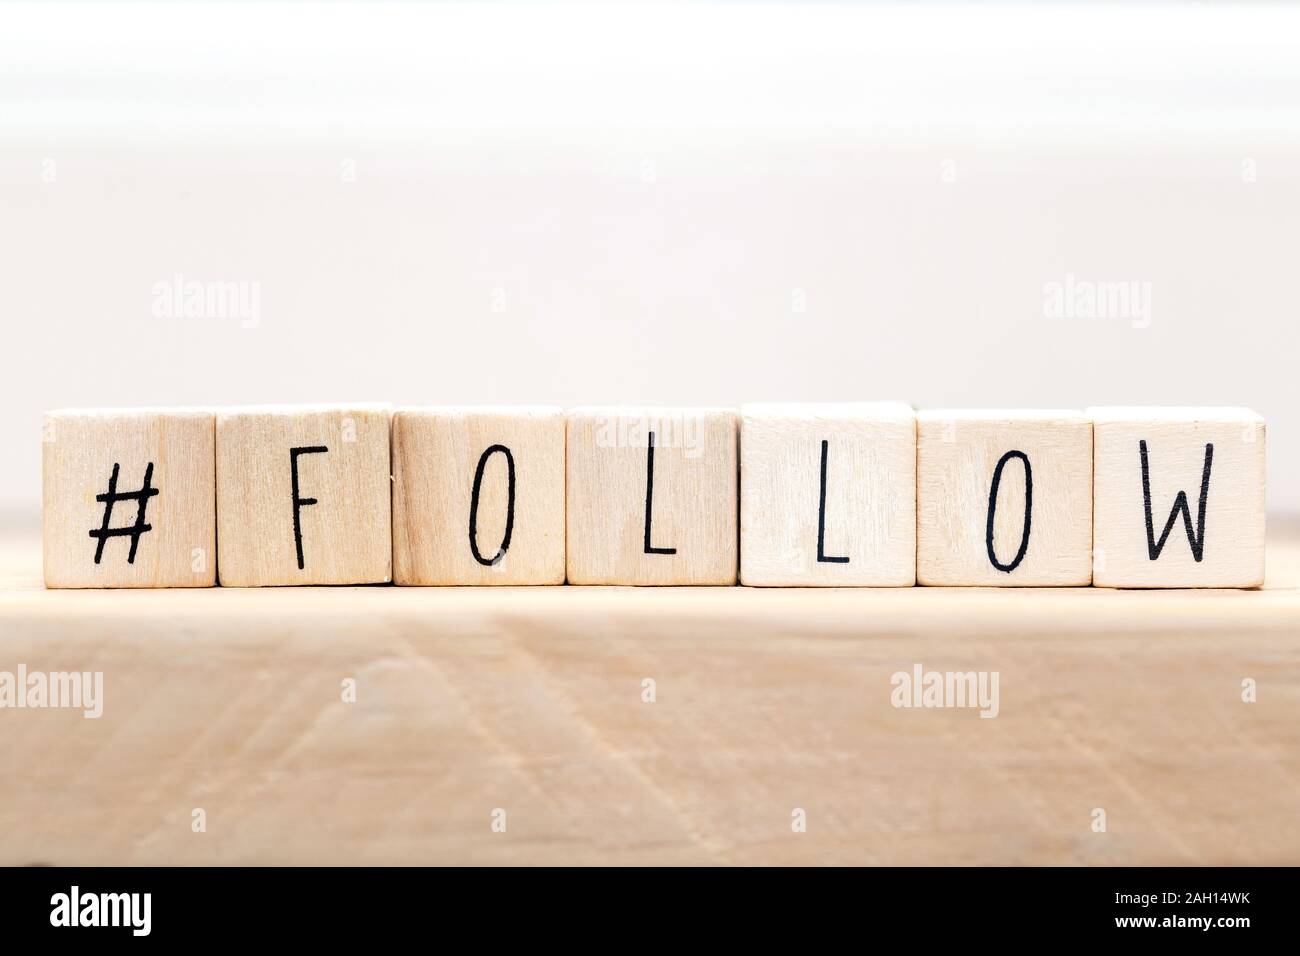 Follow sign made of cubes on a wooden table with Hashtag near white background, socialmedia concept Stock Photo